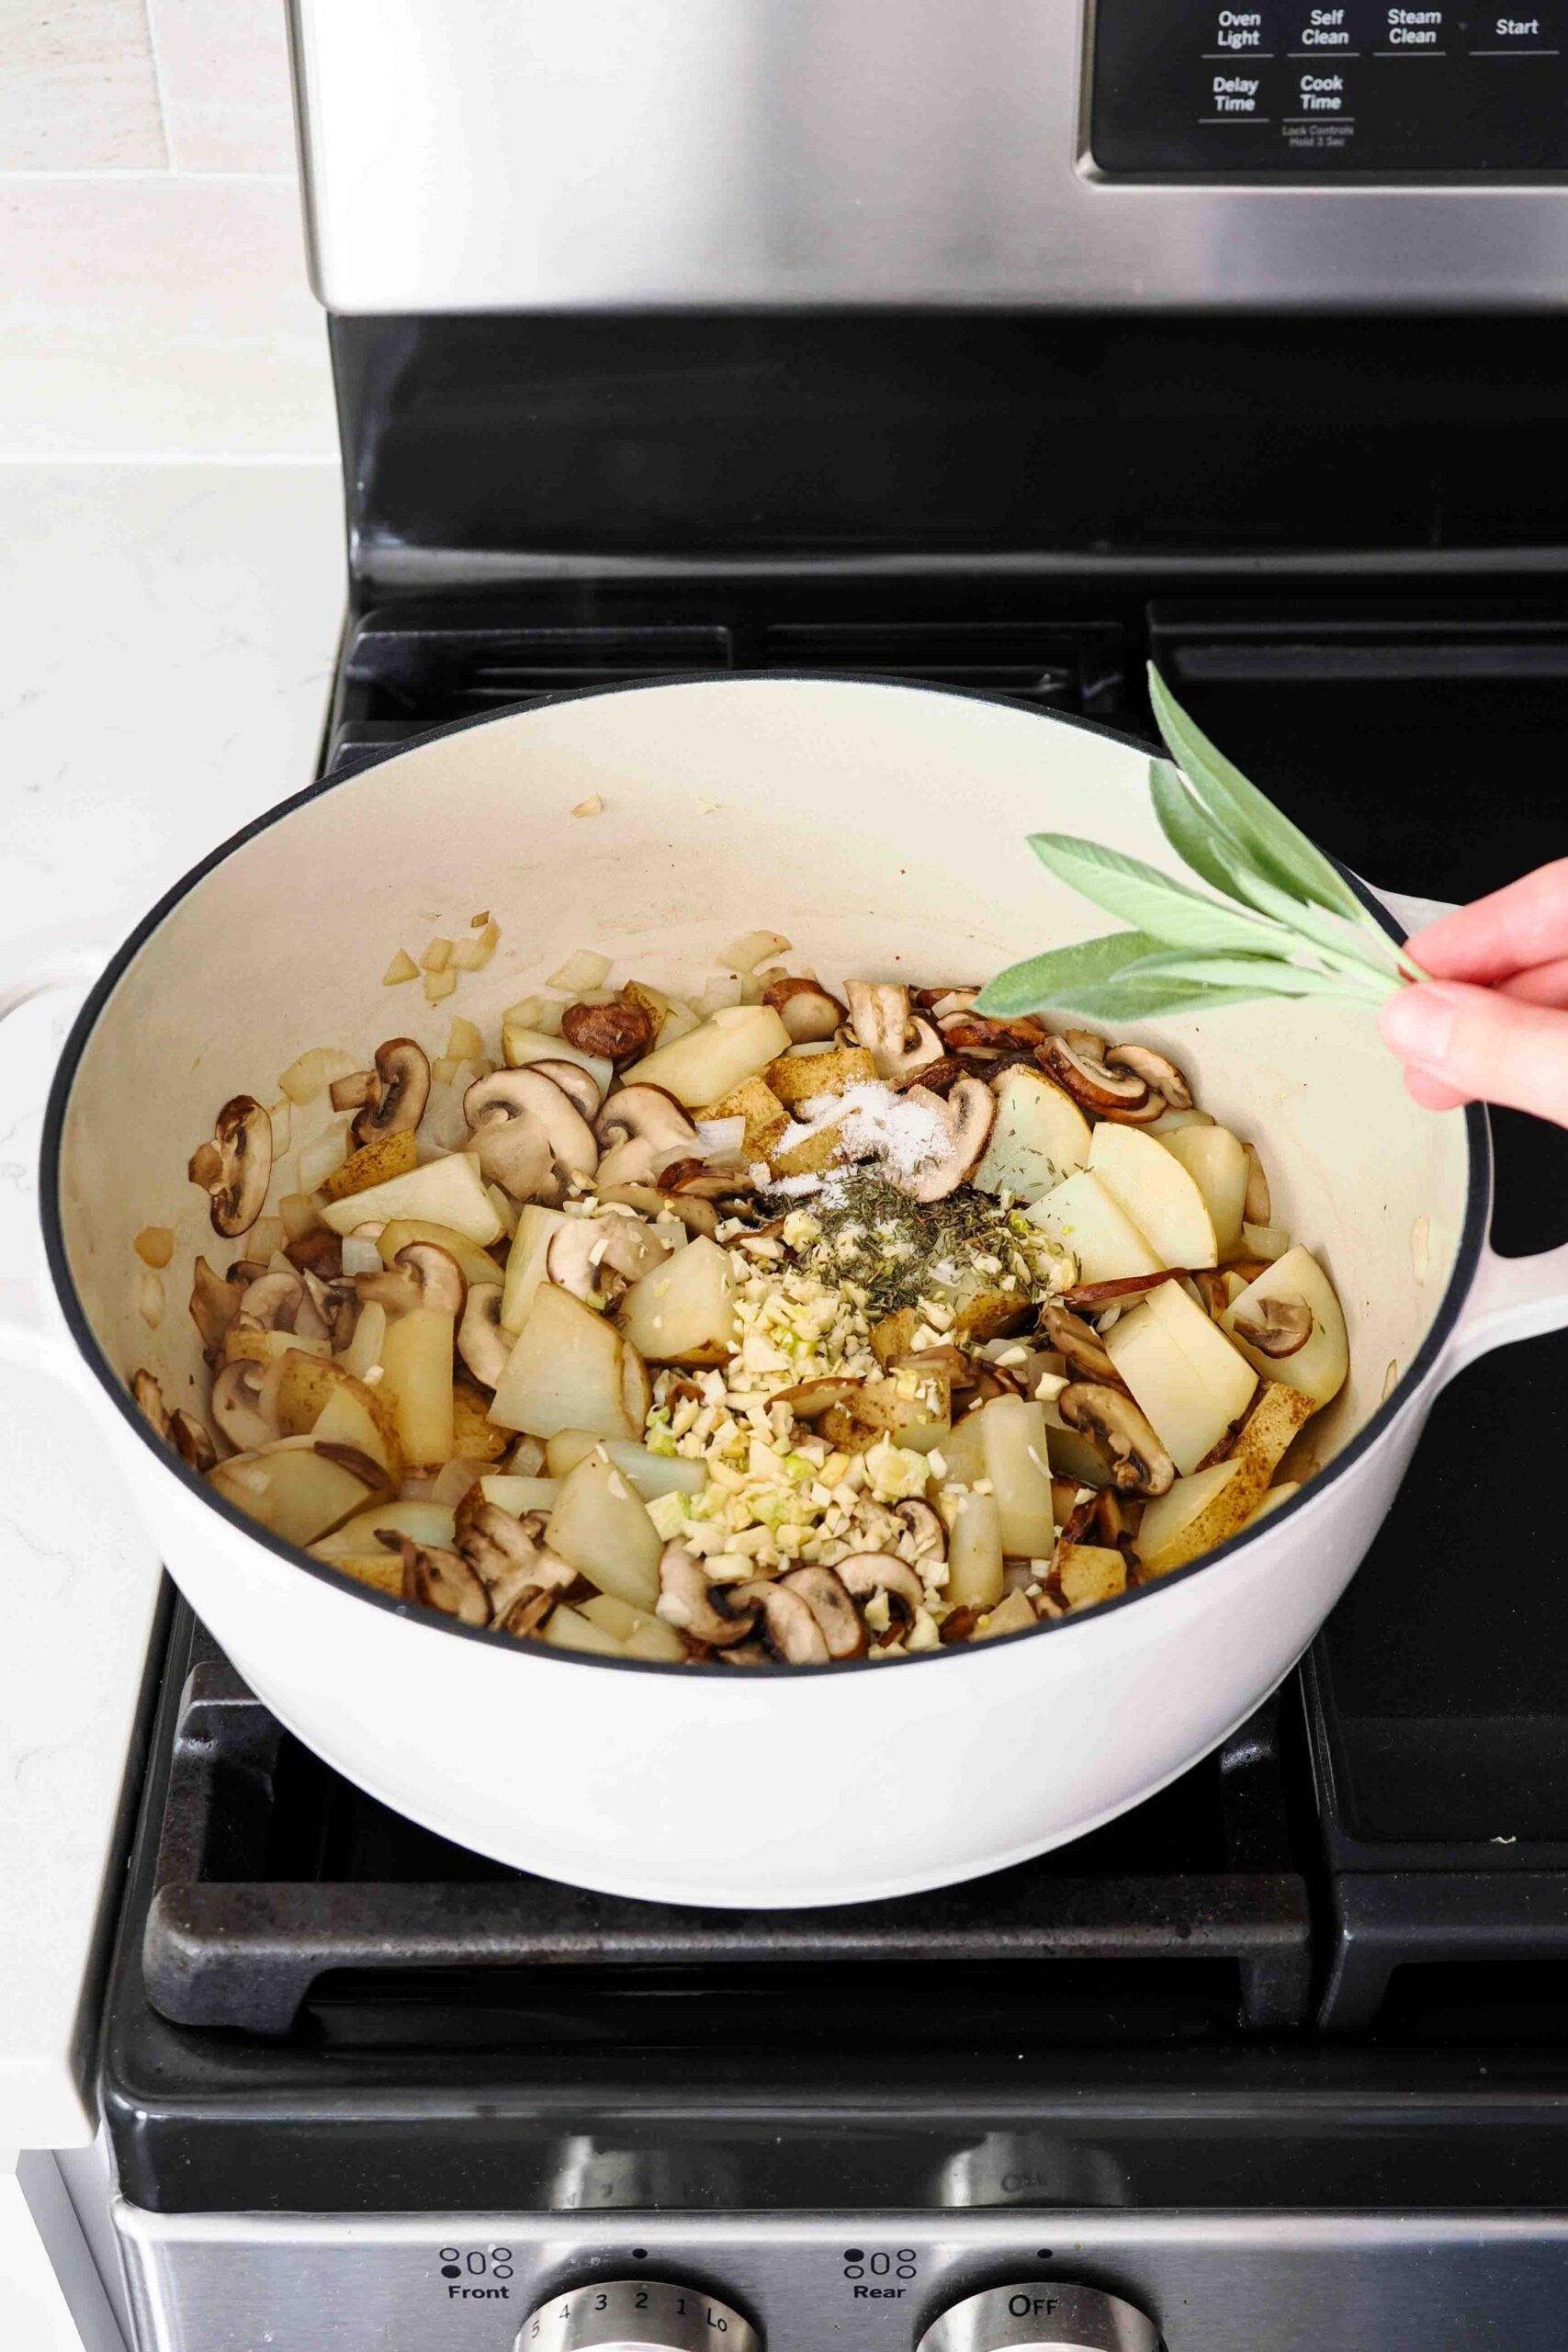 A hand adds a bunch of fresh sage to cooked vegetables in a Dutch oven.